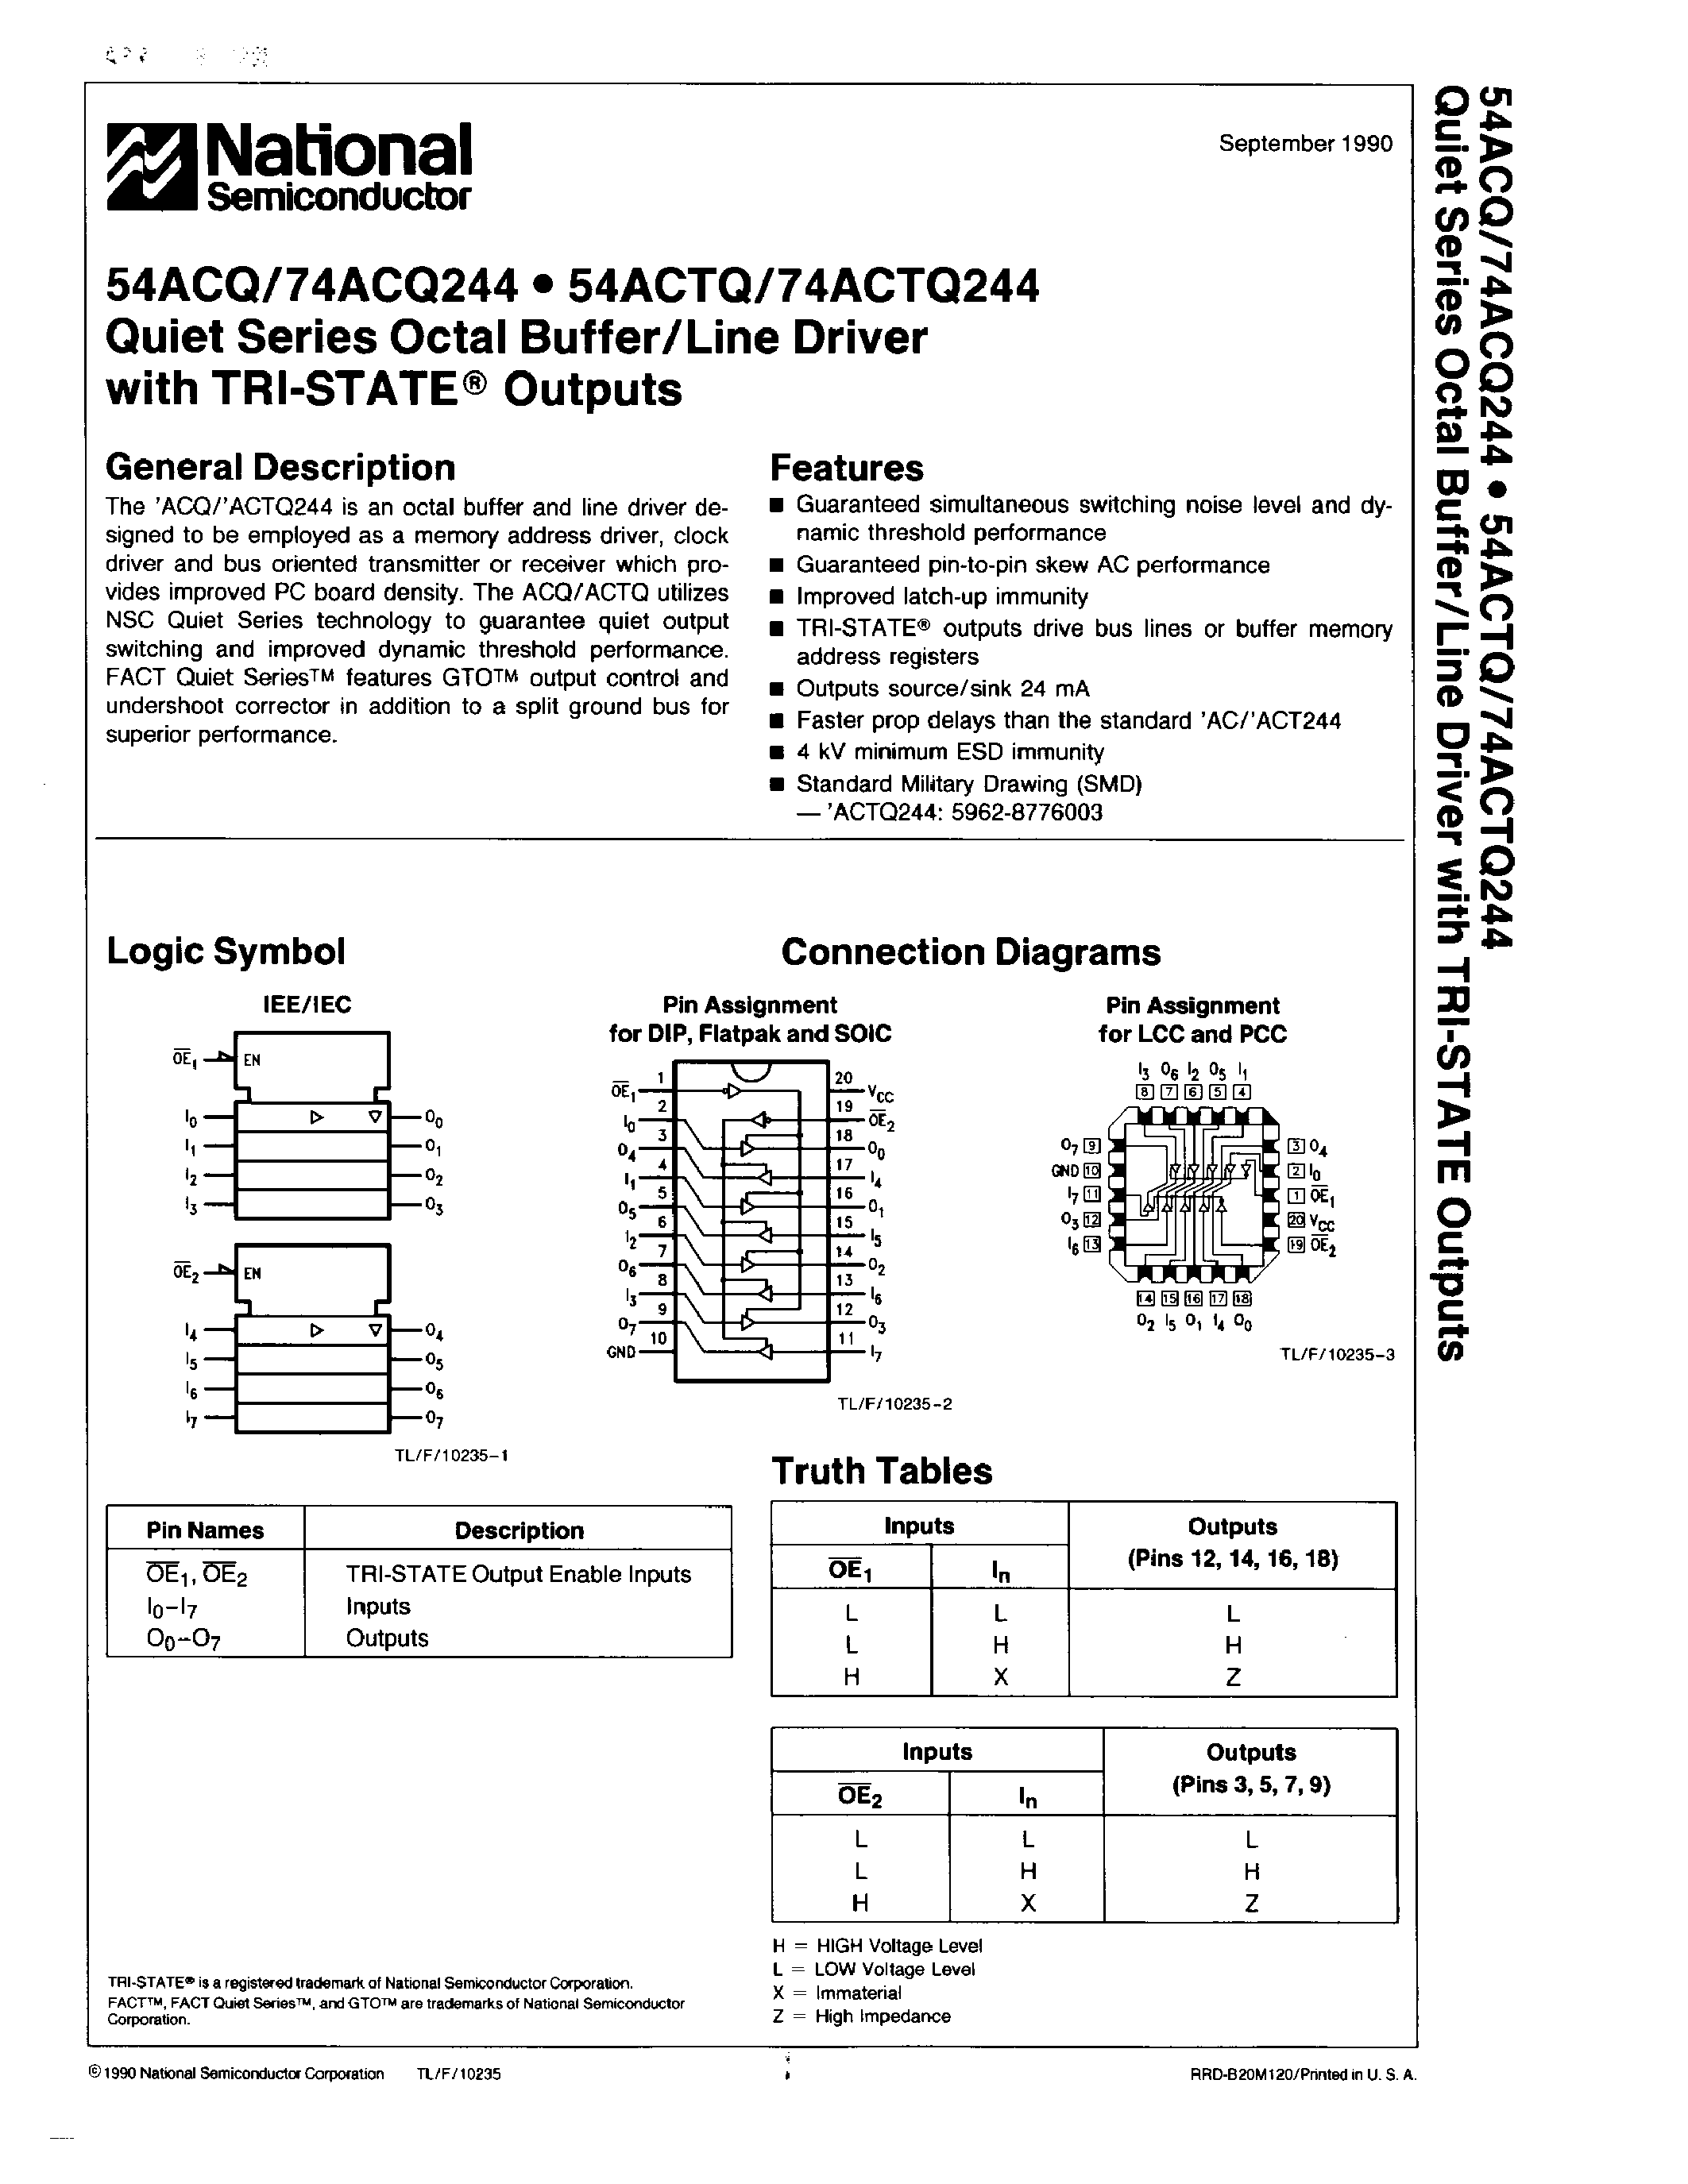 Datasheet 74ACQ244Q - Quiet Seres Octal Buffer/Line Driver with TRI-STATE Outputs page 1